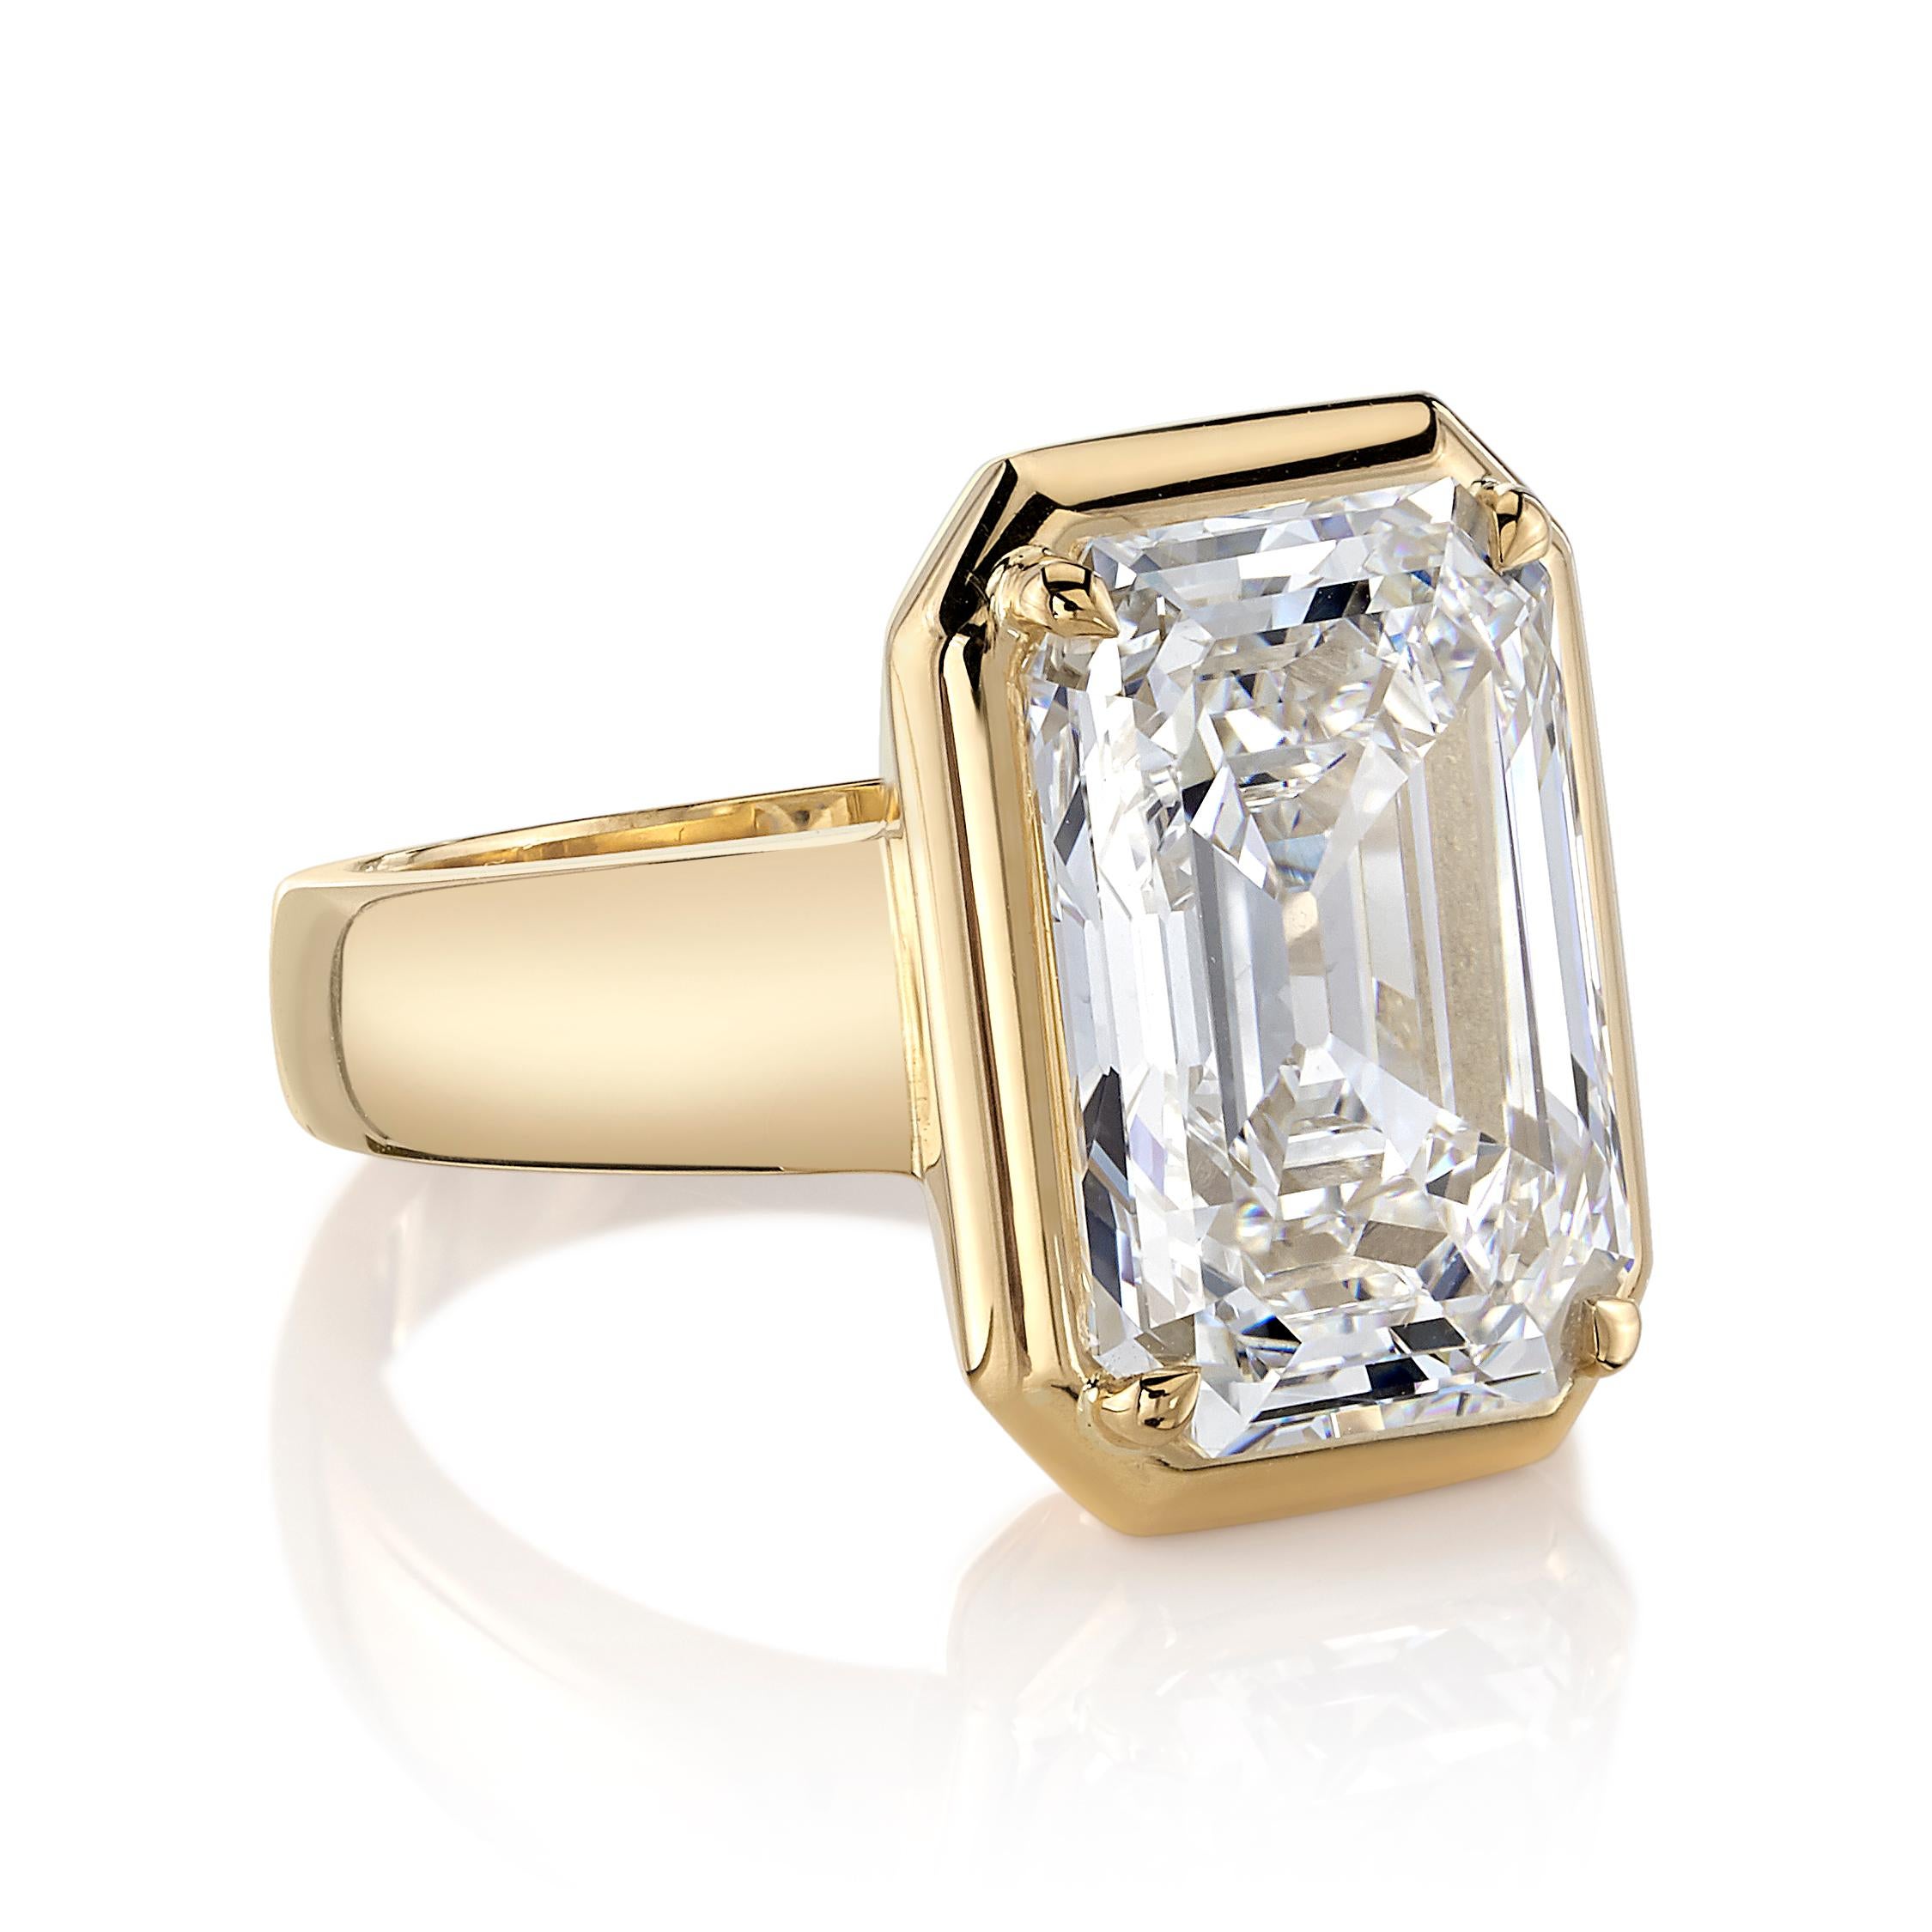 By Single Stone, the Cori ring features a GIA certified 6.02 carat emerald cut diamond with H coloring and VVS1 clarity. This vintage diamond is set in 18 karat yellow gold. The ring is a size 6.